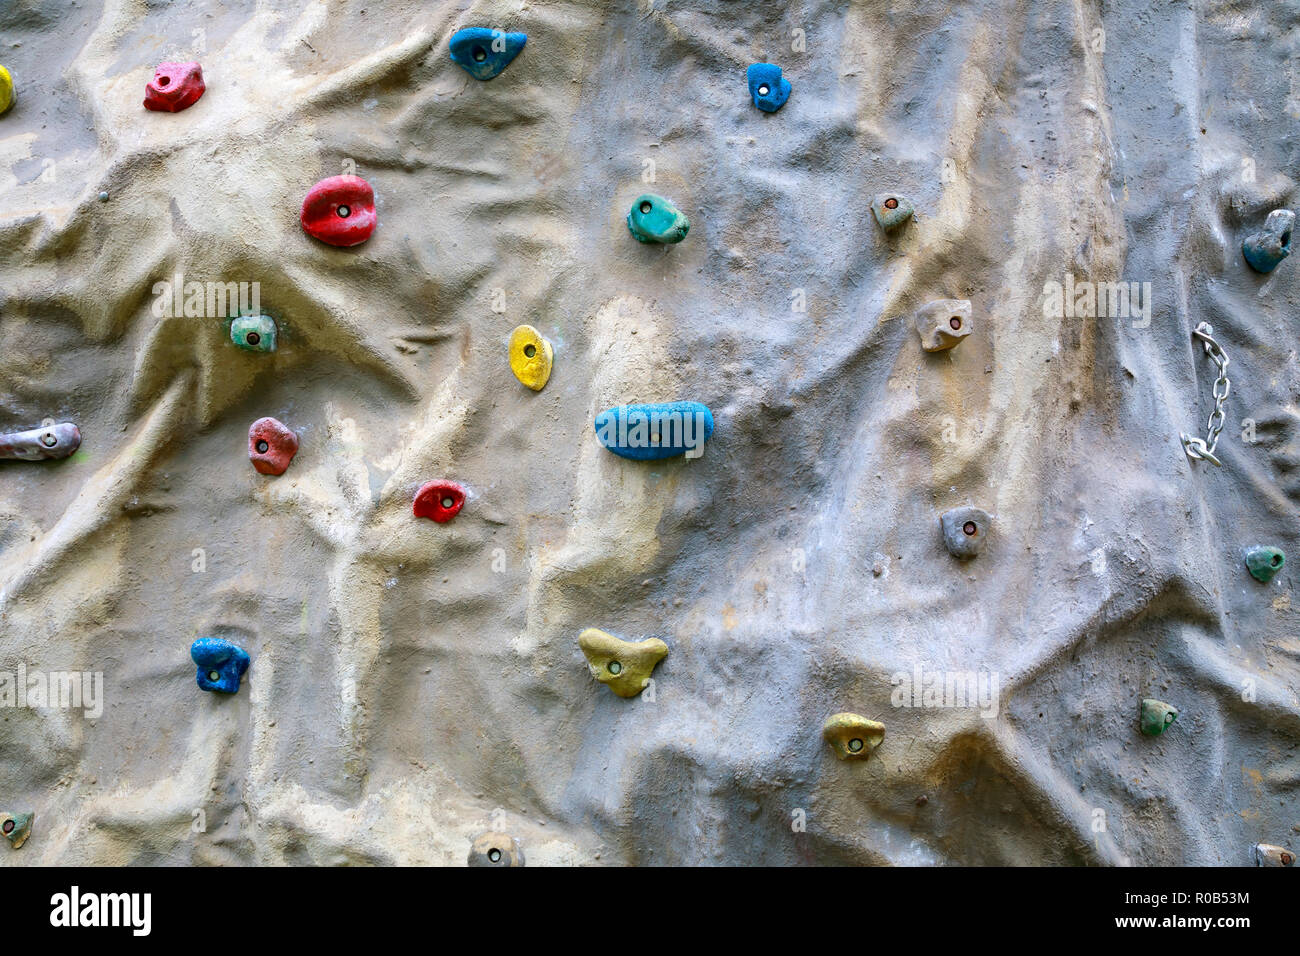 Artificial climbing wall with different sized grips Stock Photo